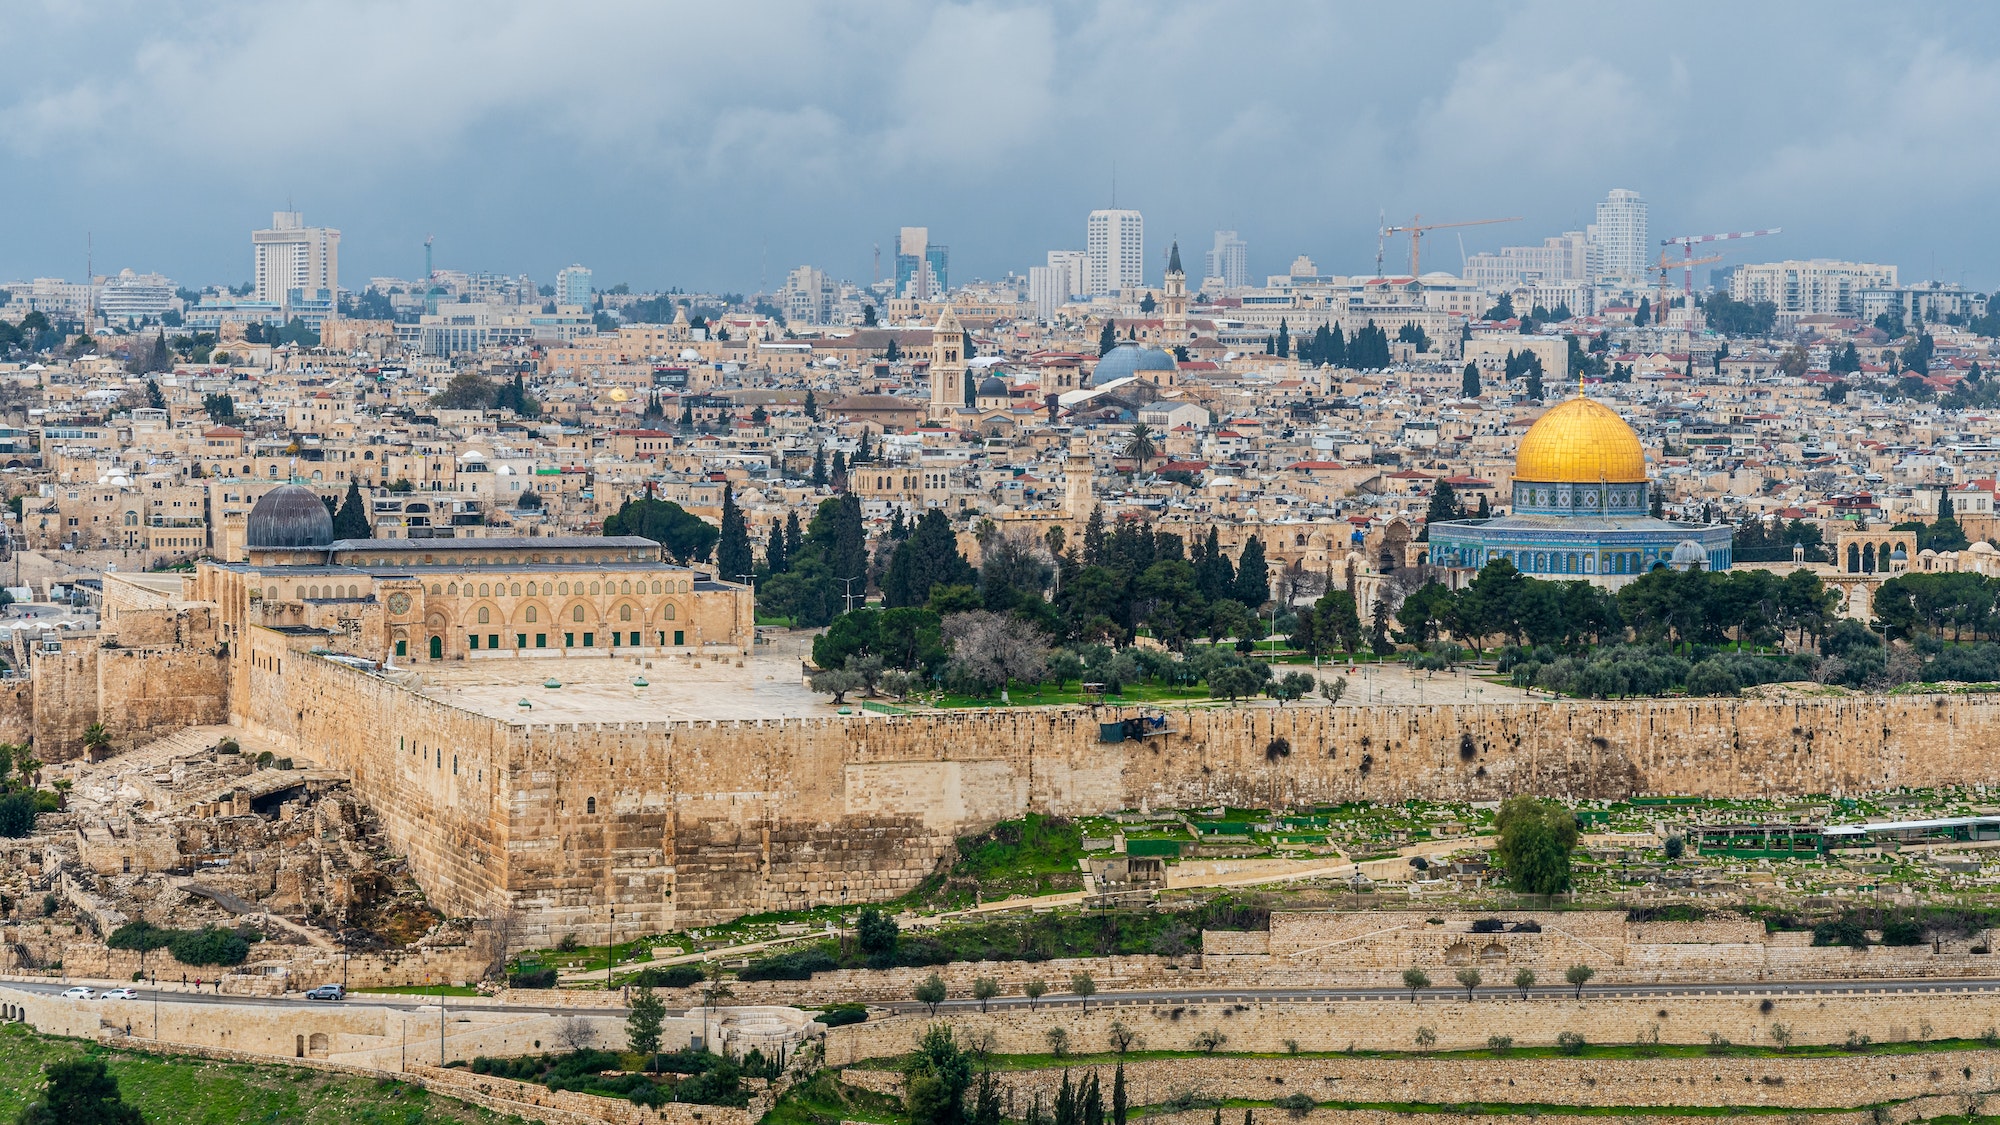 Beautiful view of Jerusalem from the Mount of Olives